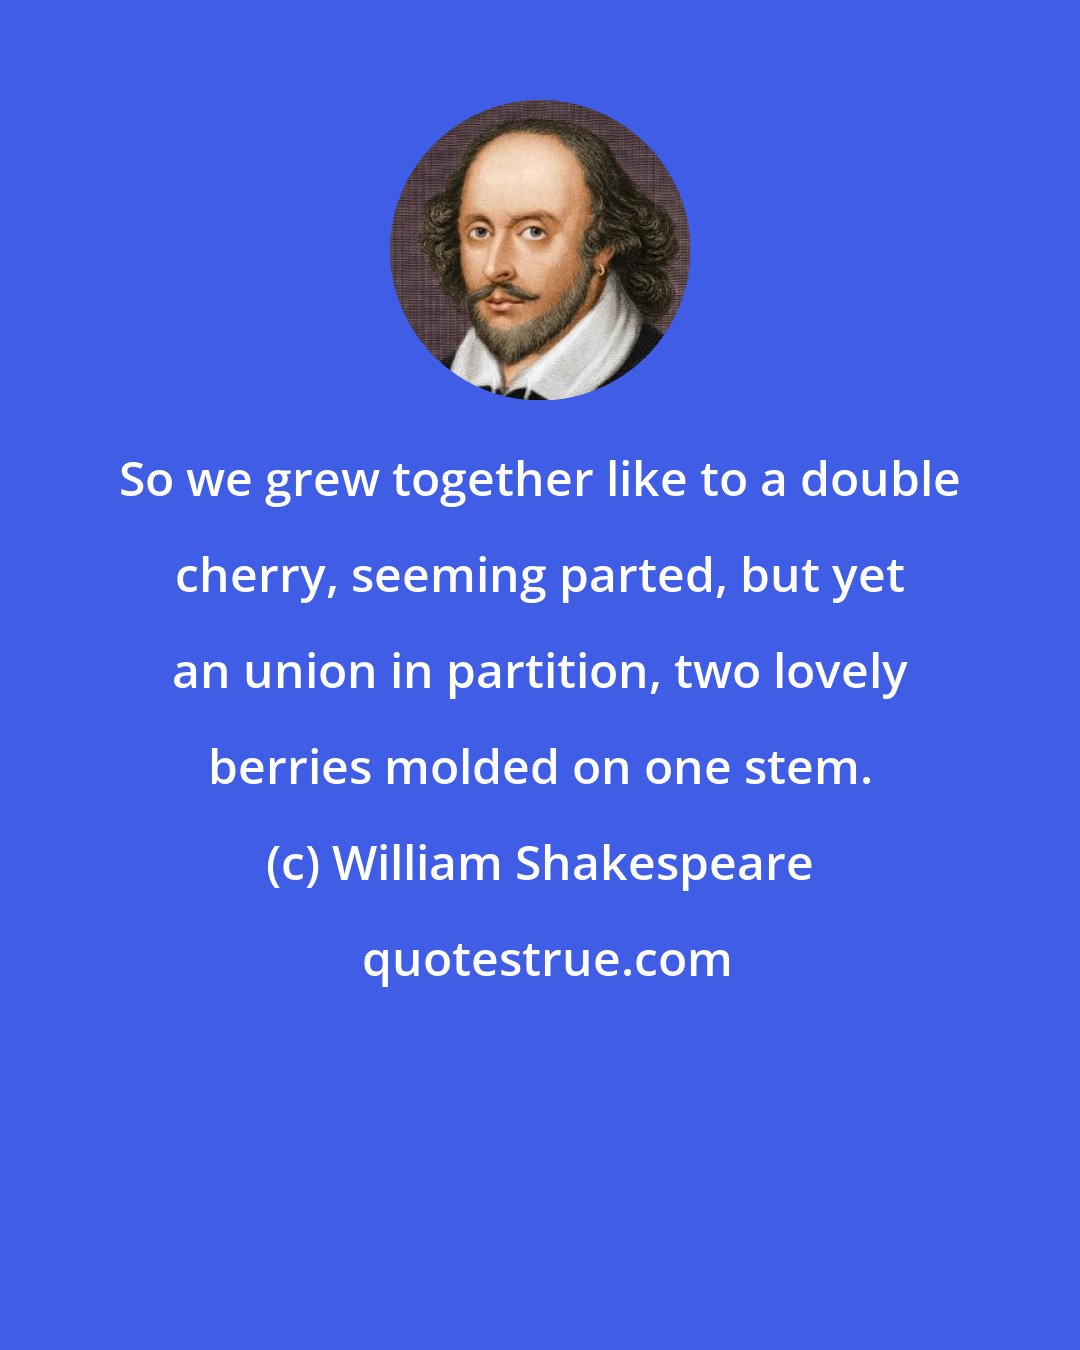 William Shakespeare: So we grew together like to a double cherry, seeming parted, but yet an union in partition, two lovely berries molded on one stem.